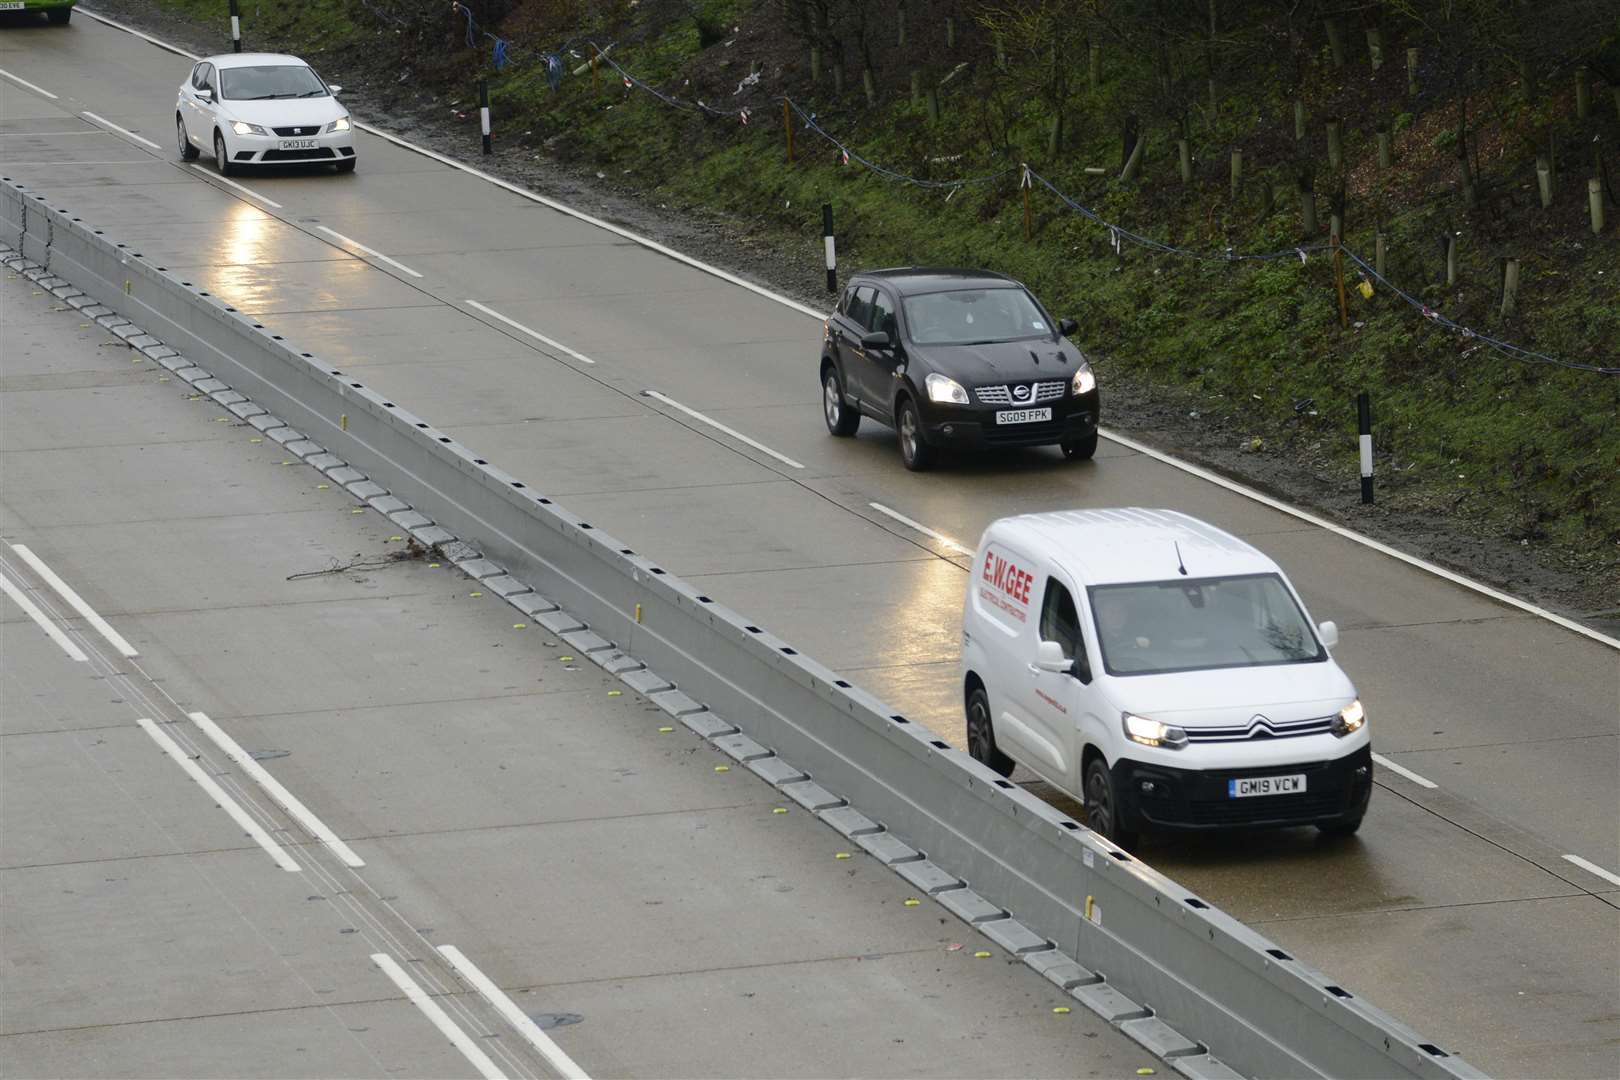 Drivers faced 50mph restrictions until the barrier was removed in January this year